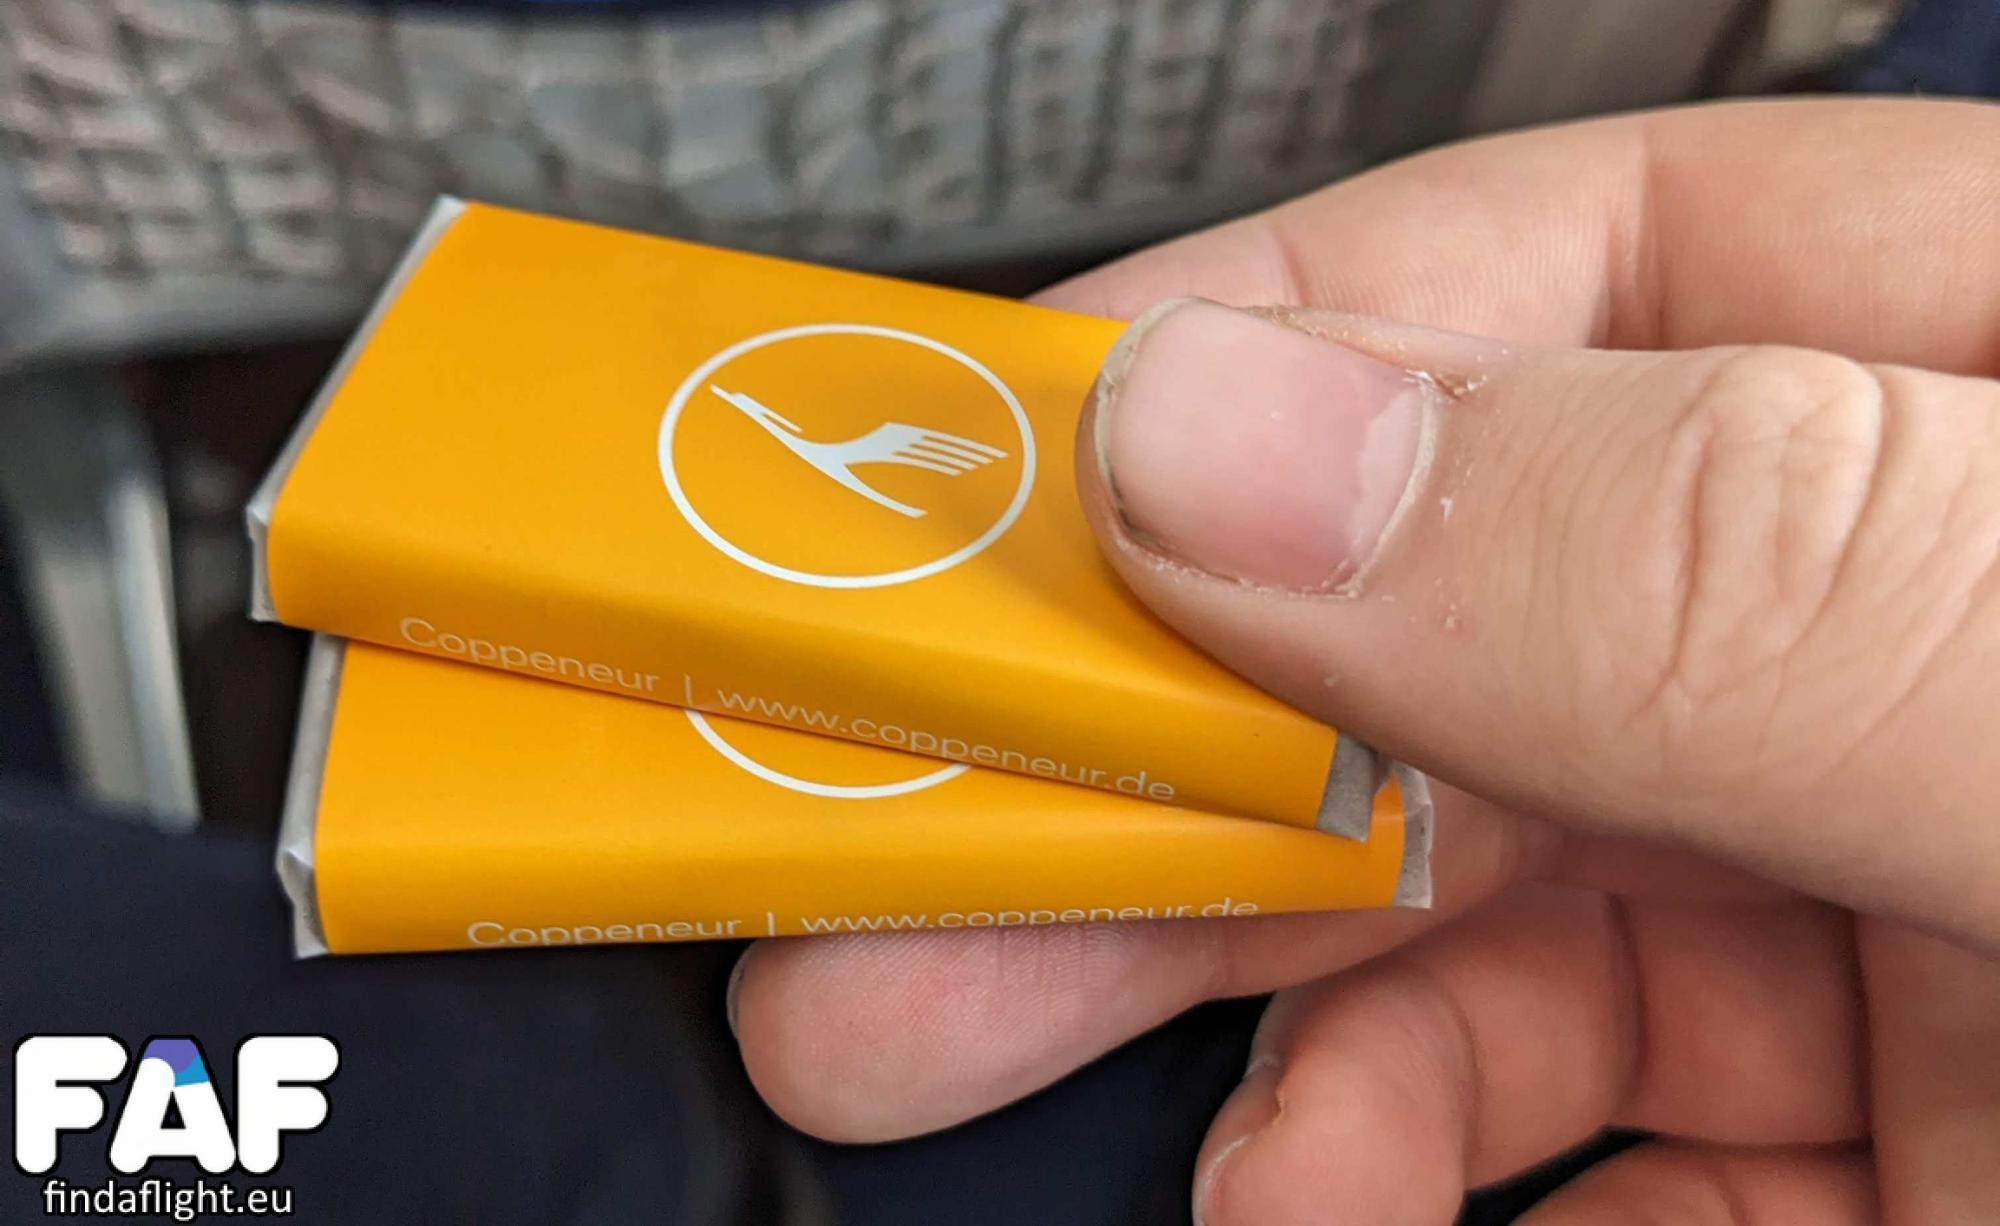 Lufthansa Chocolate from the outside